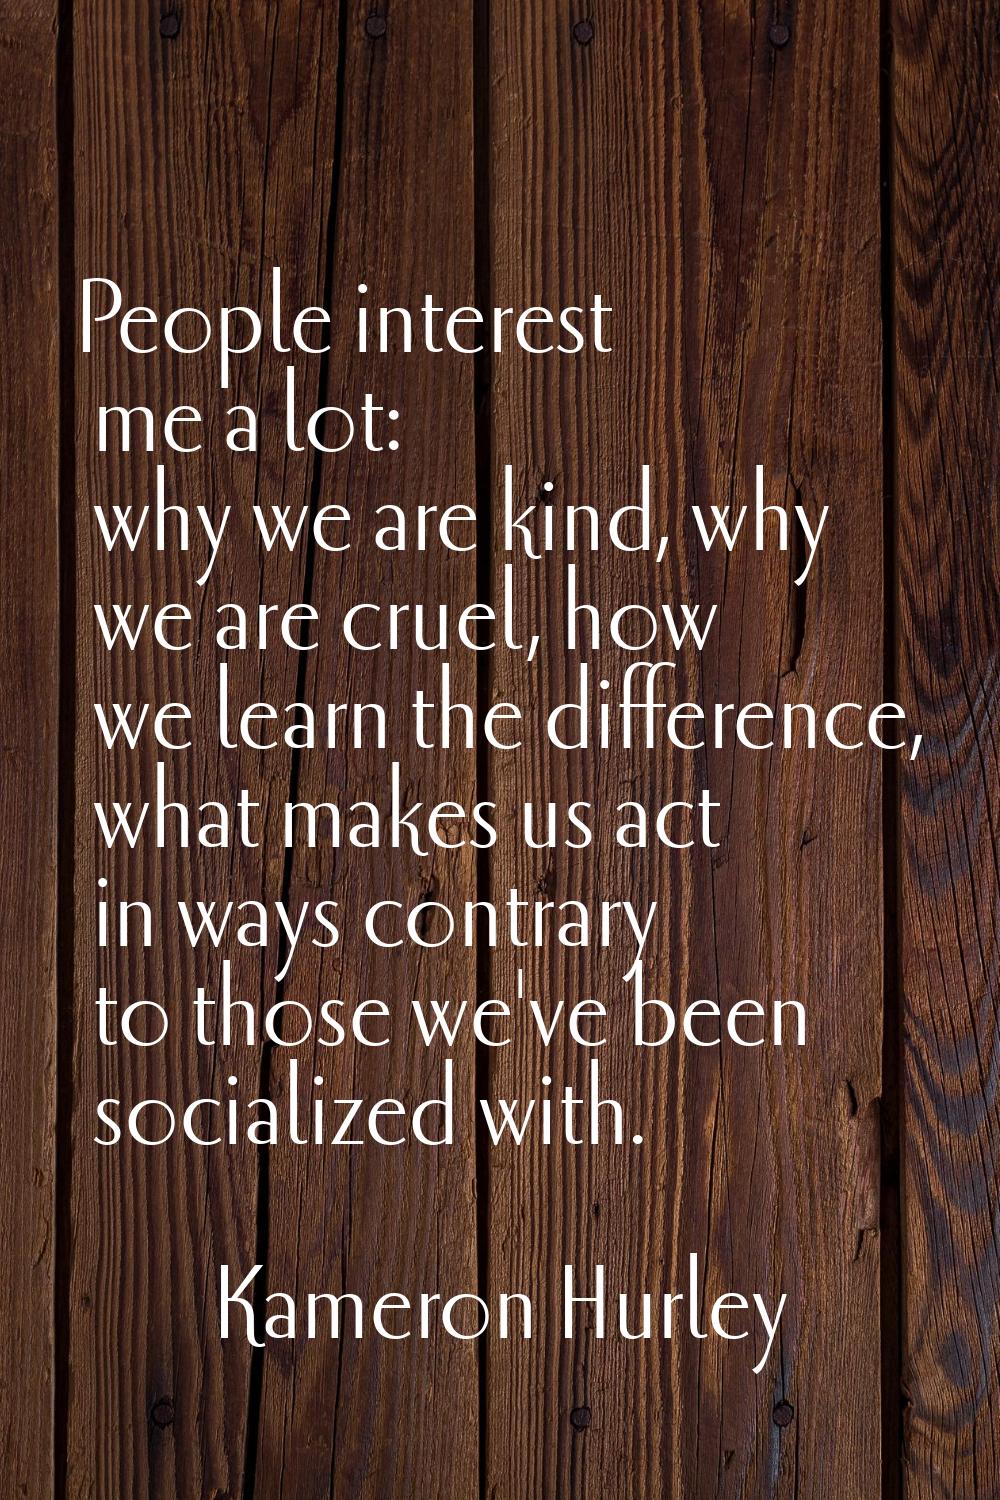 People interest me a lot: why we are kind, why we are cruel, how we learn the difference, what make